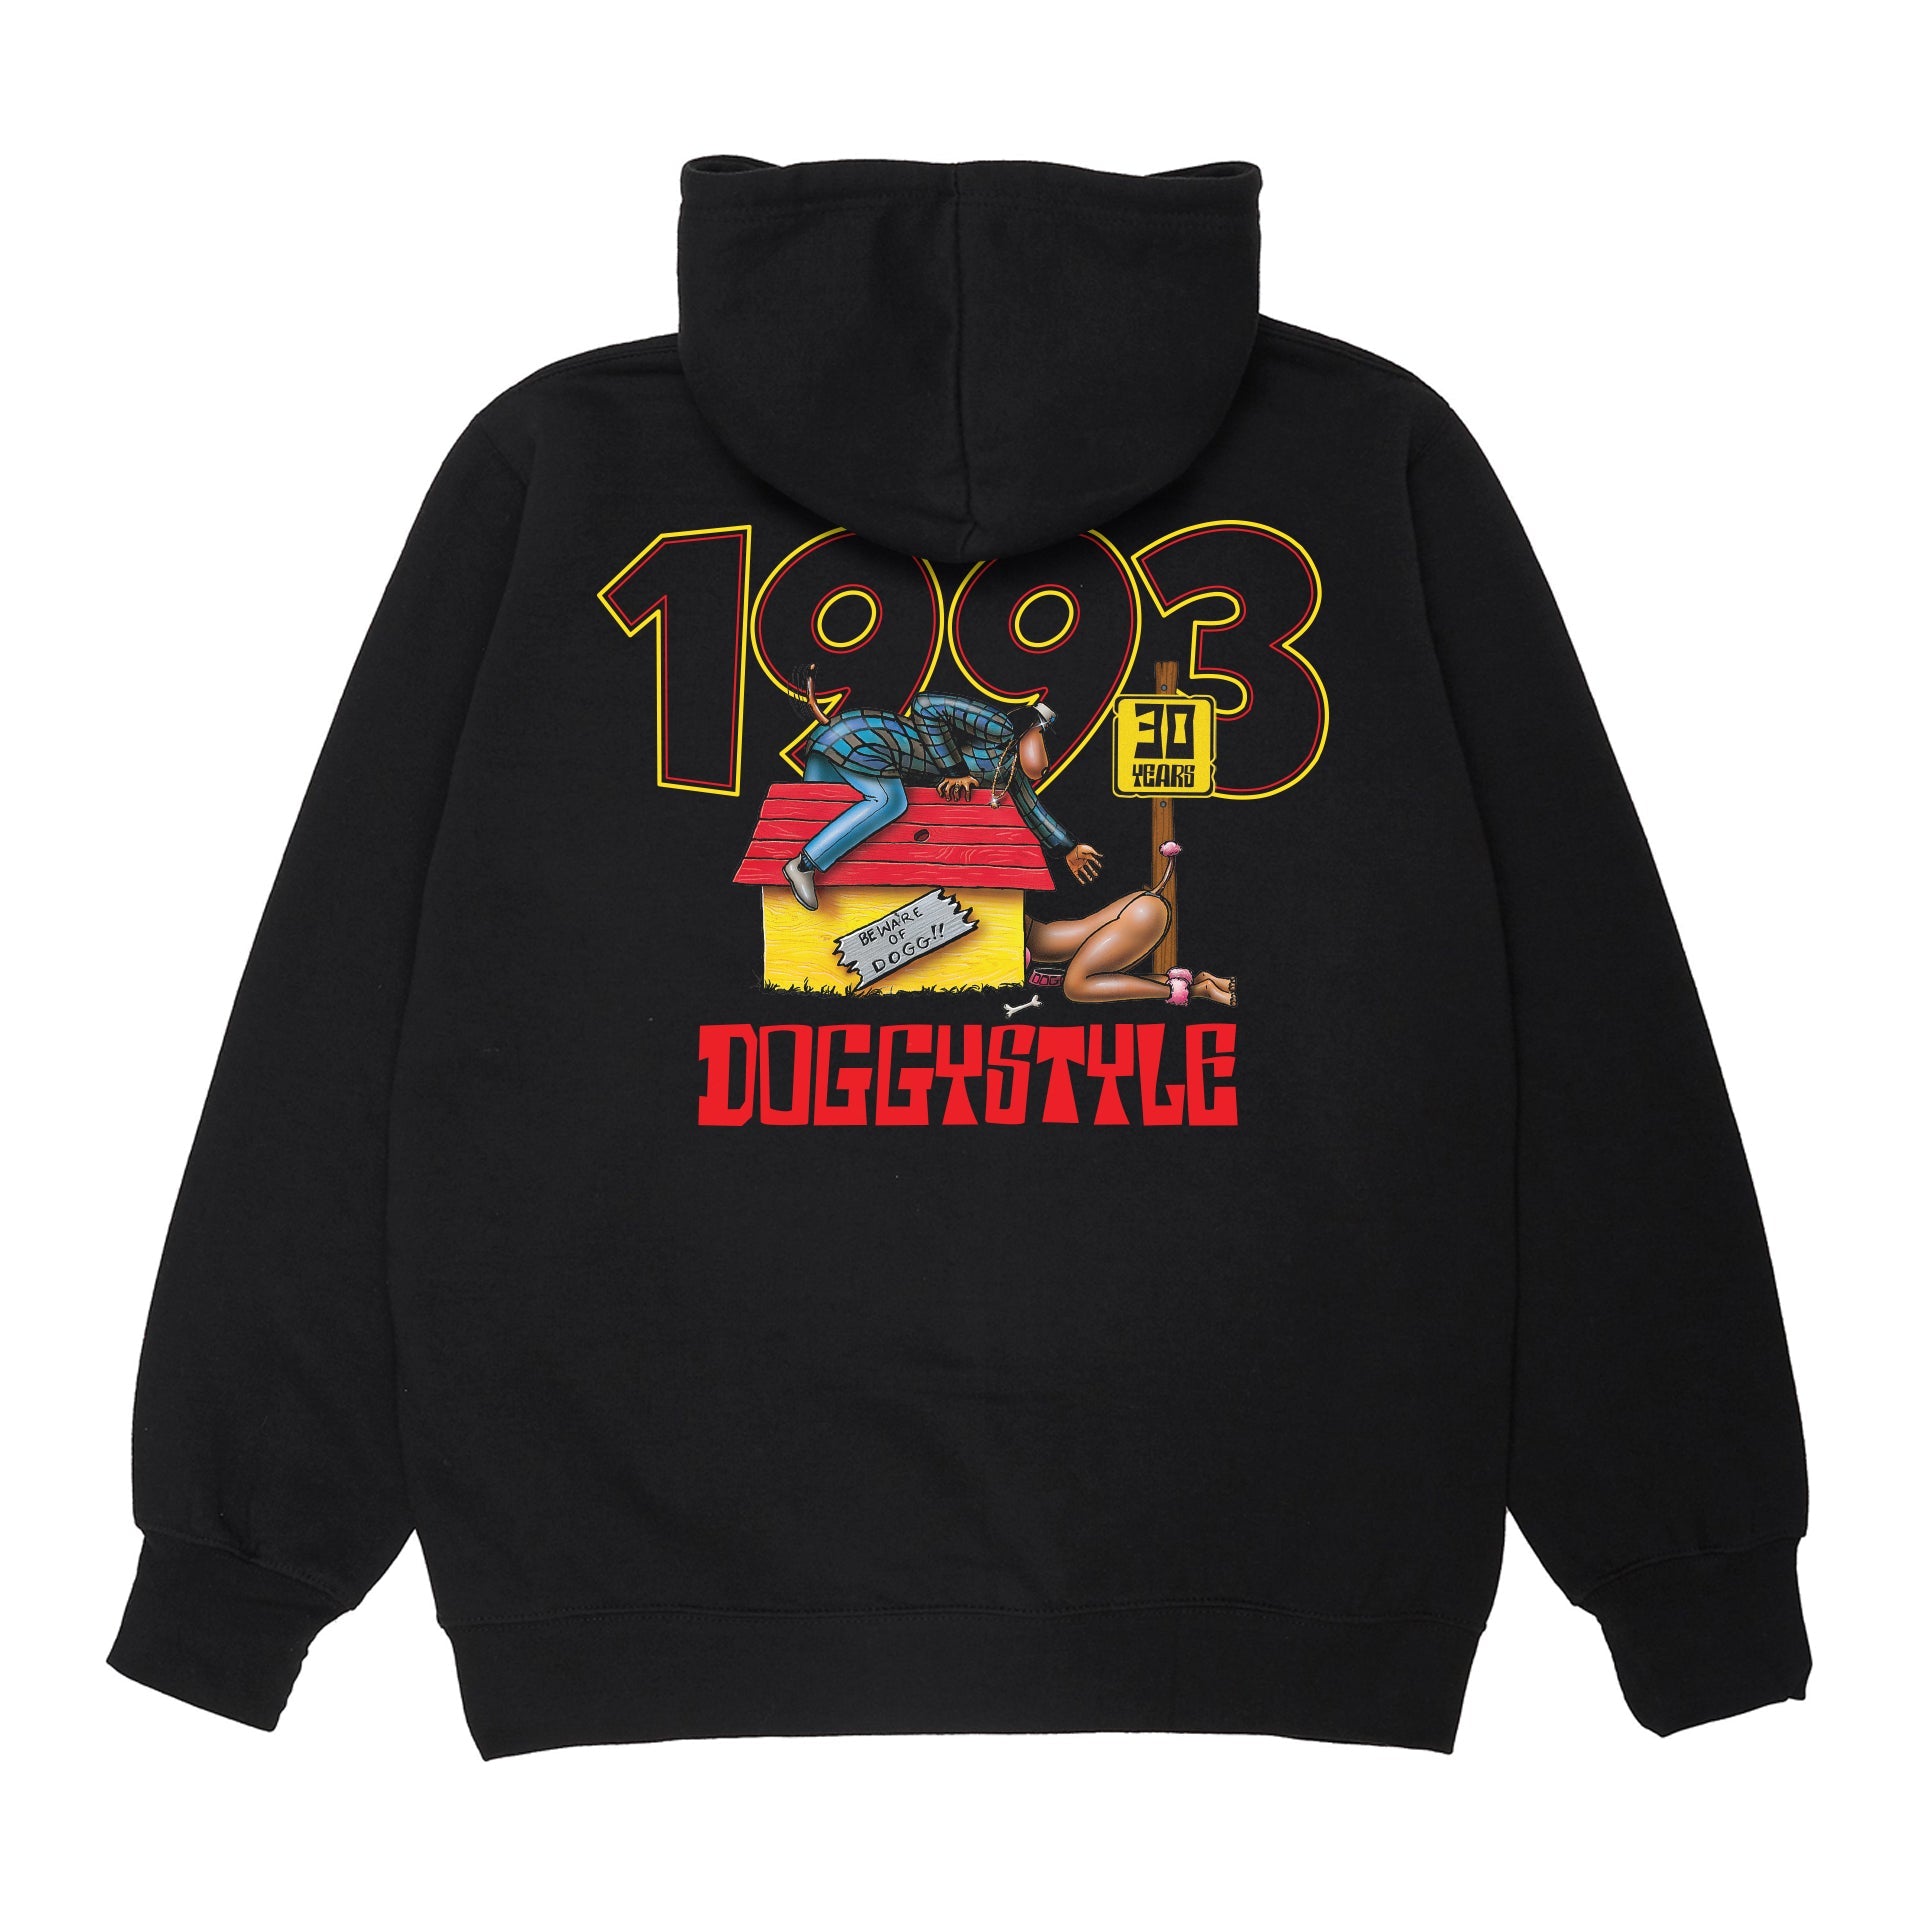 1993 Doggystyle Hoodie